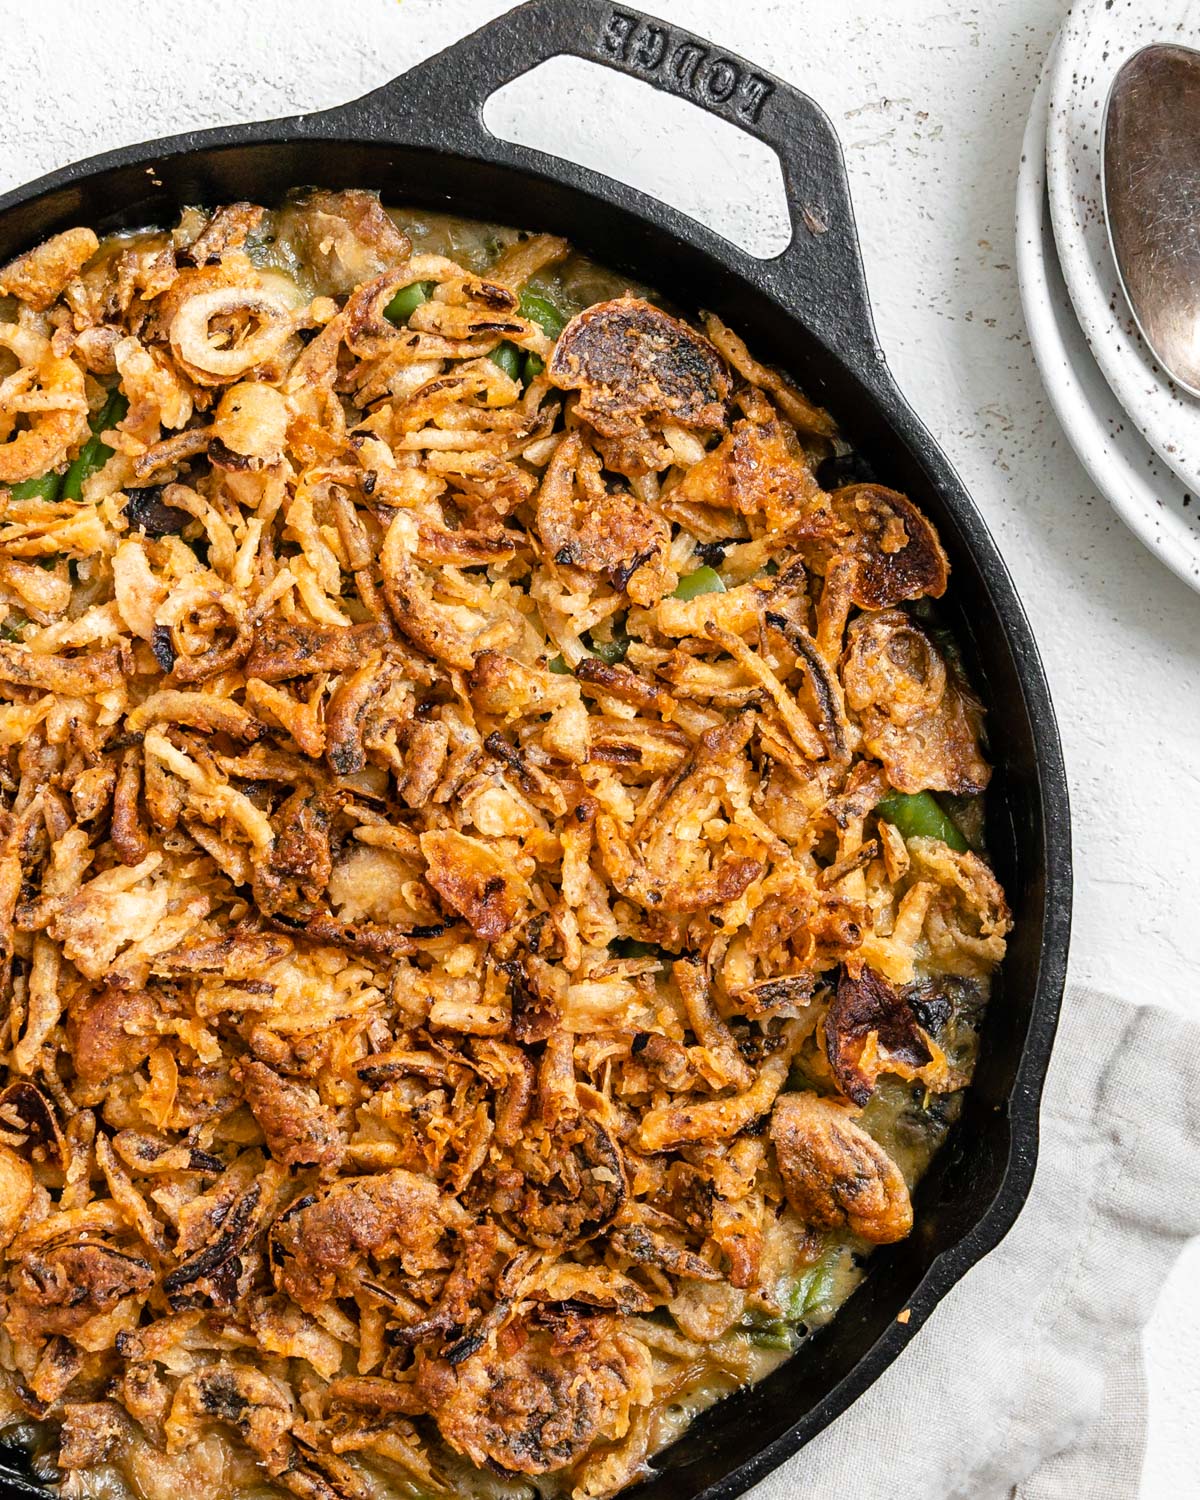 completed Dairy-Free Green Bean Casserole in a skillet against a white background